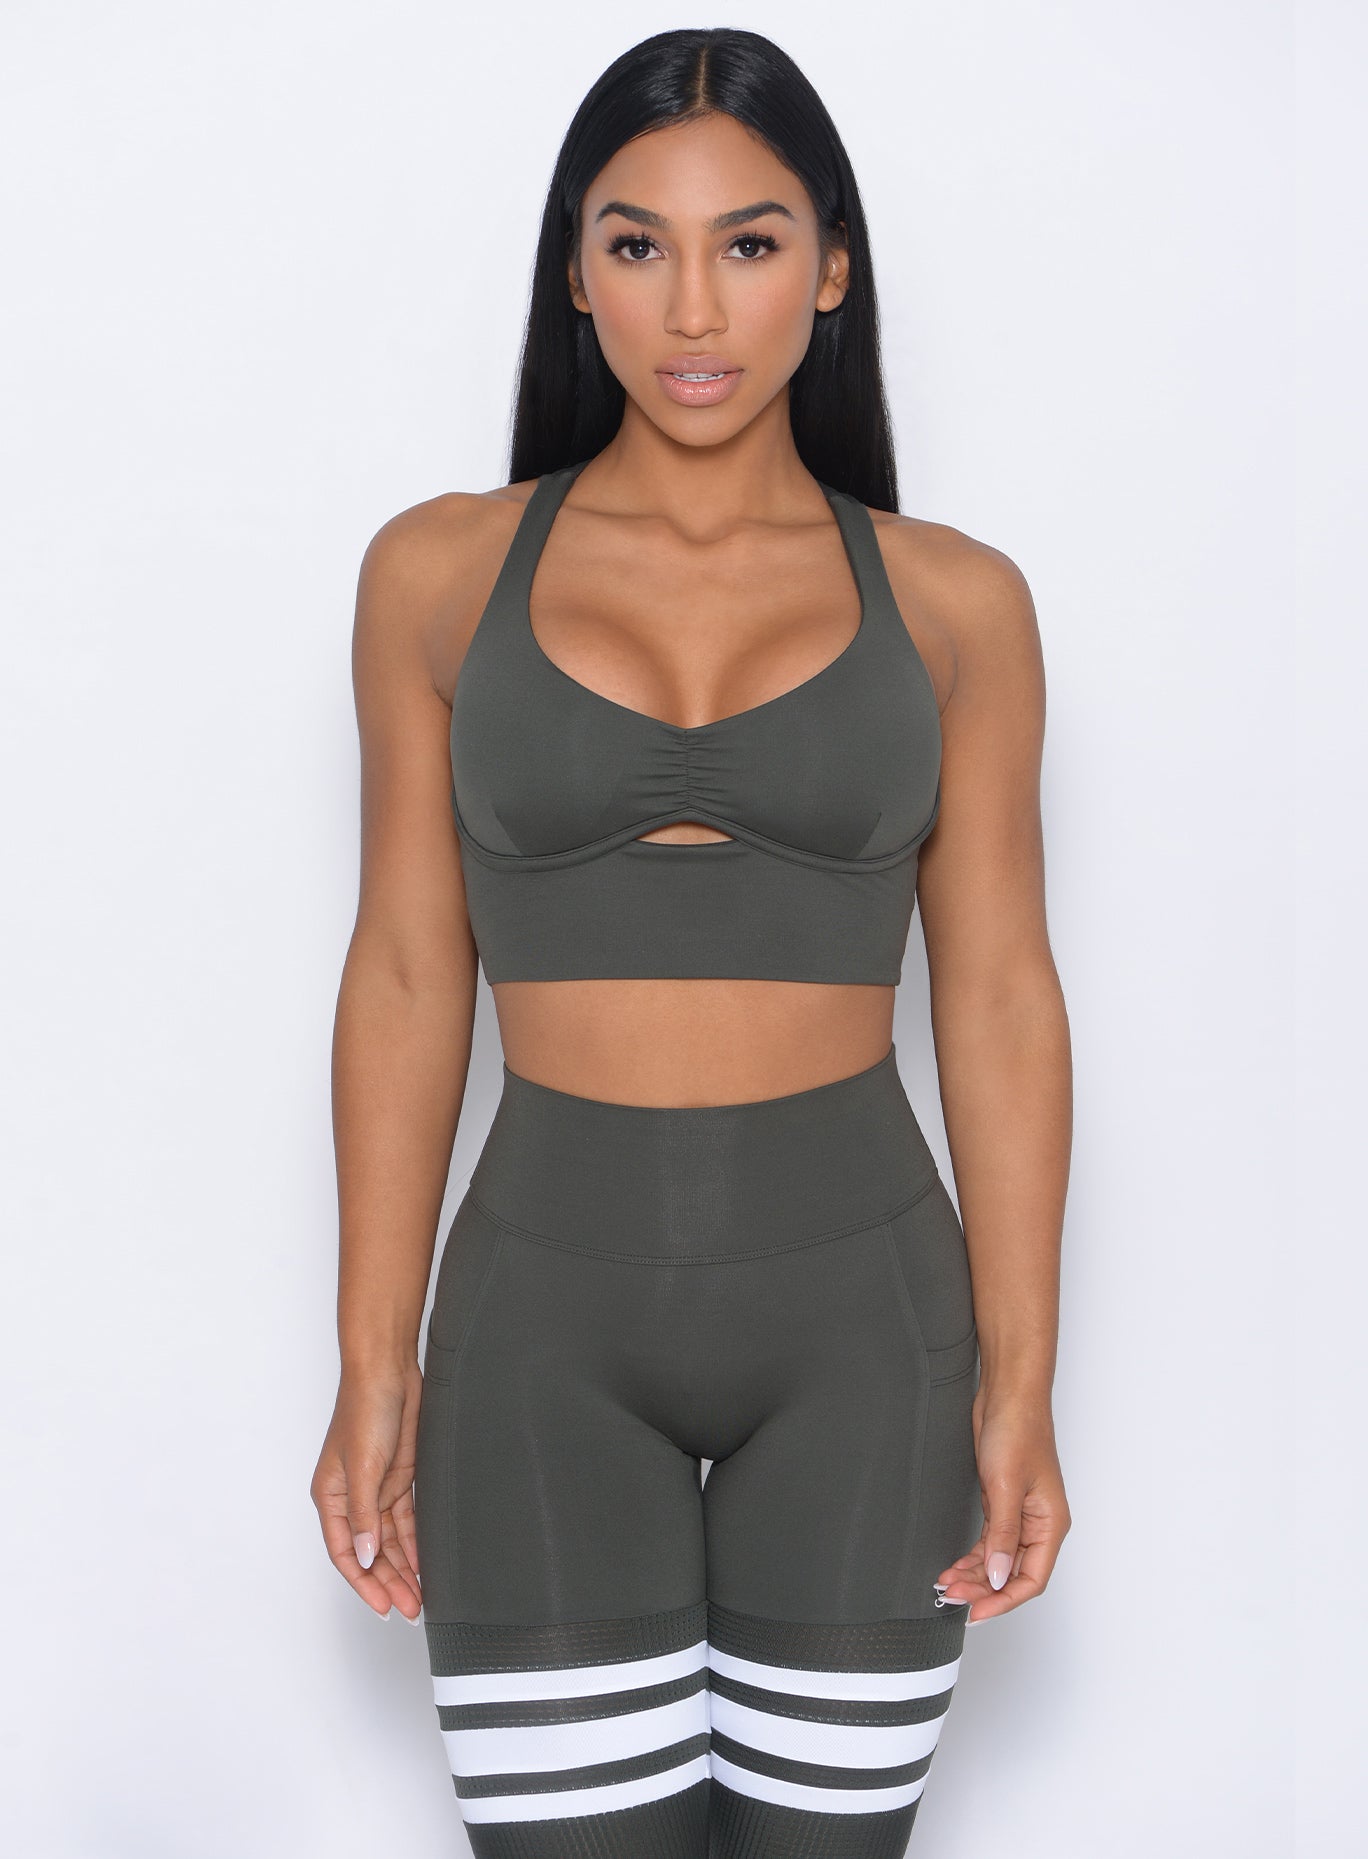 Front profile view of the model in our keyhole bralette in hunter green color and a matching leggings